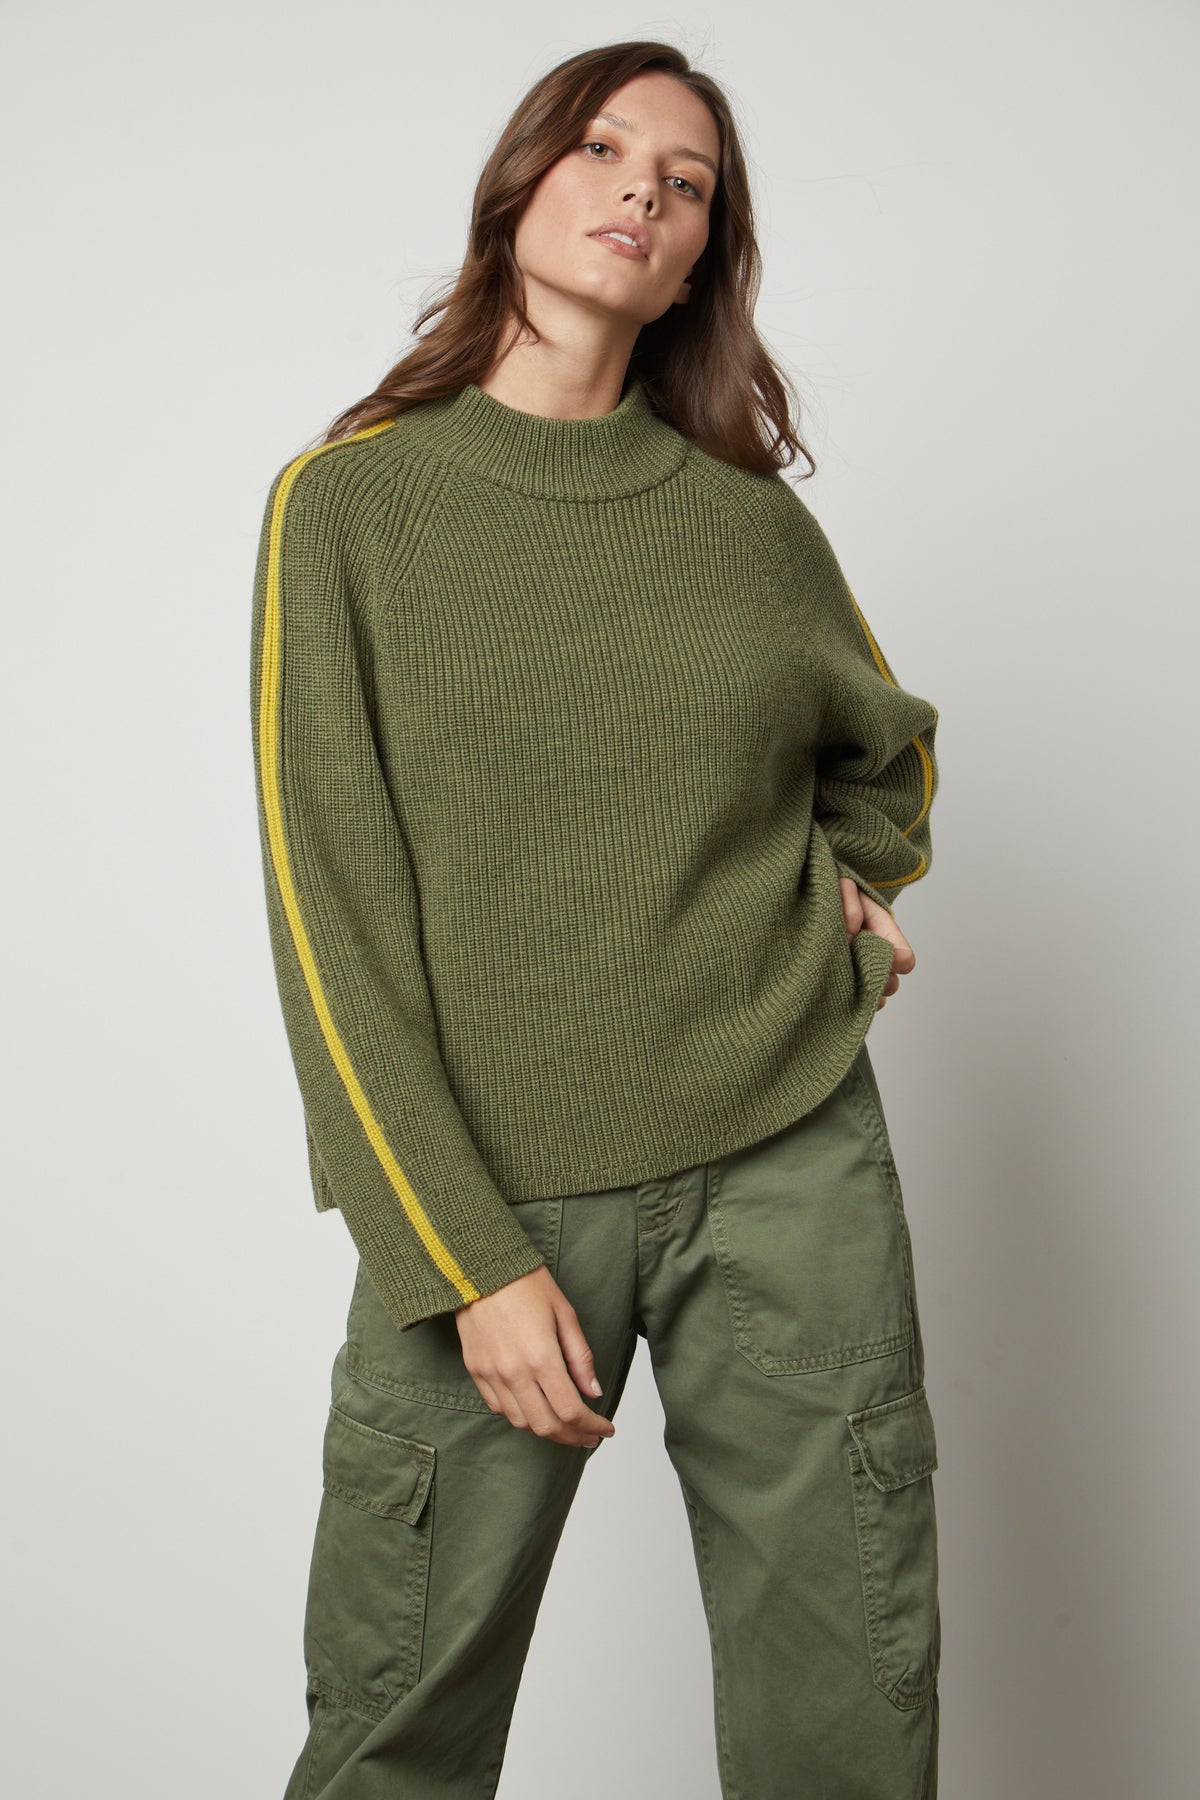   The model is wearing a TEAGAN MOCK NECK SWEATER by Velvet by Graham & Spencer and yellow cargo pants. 